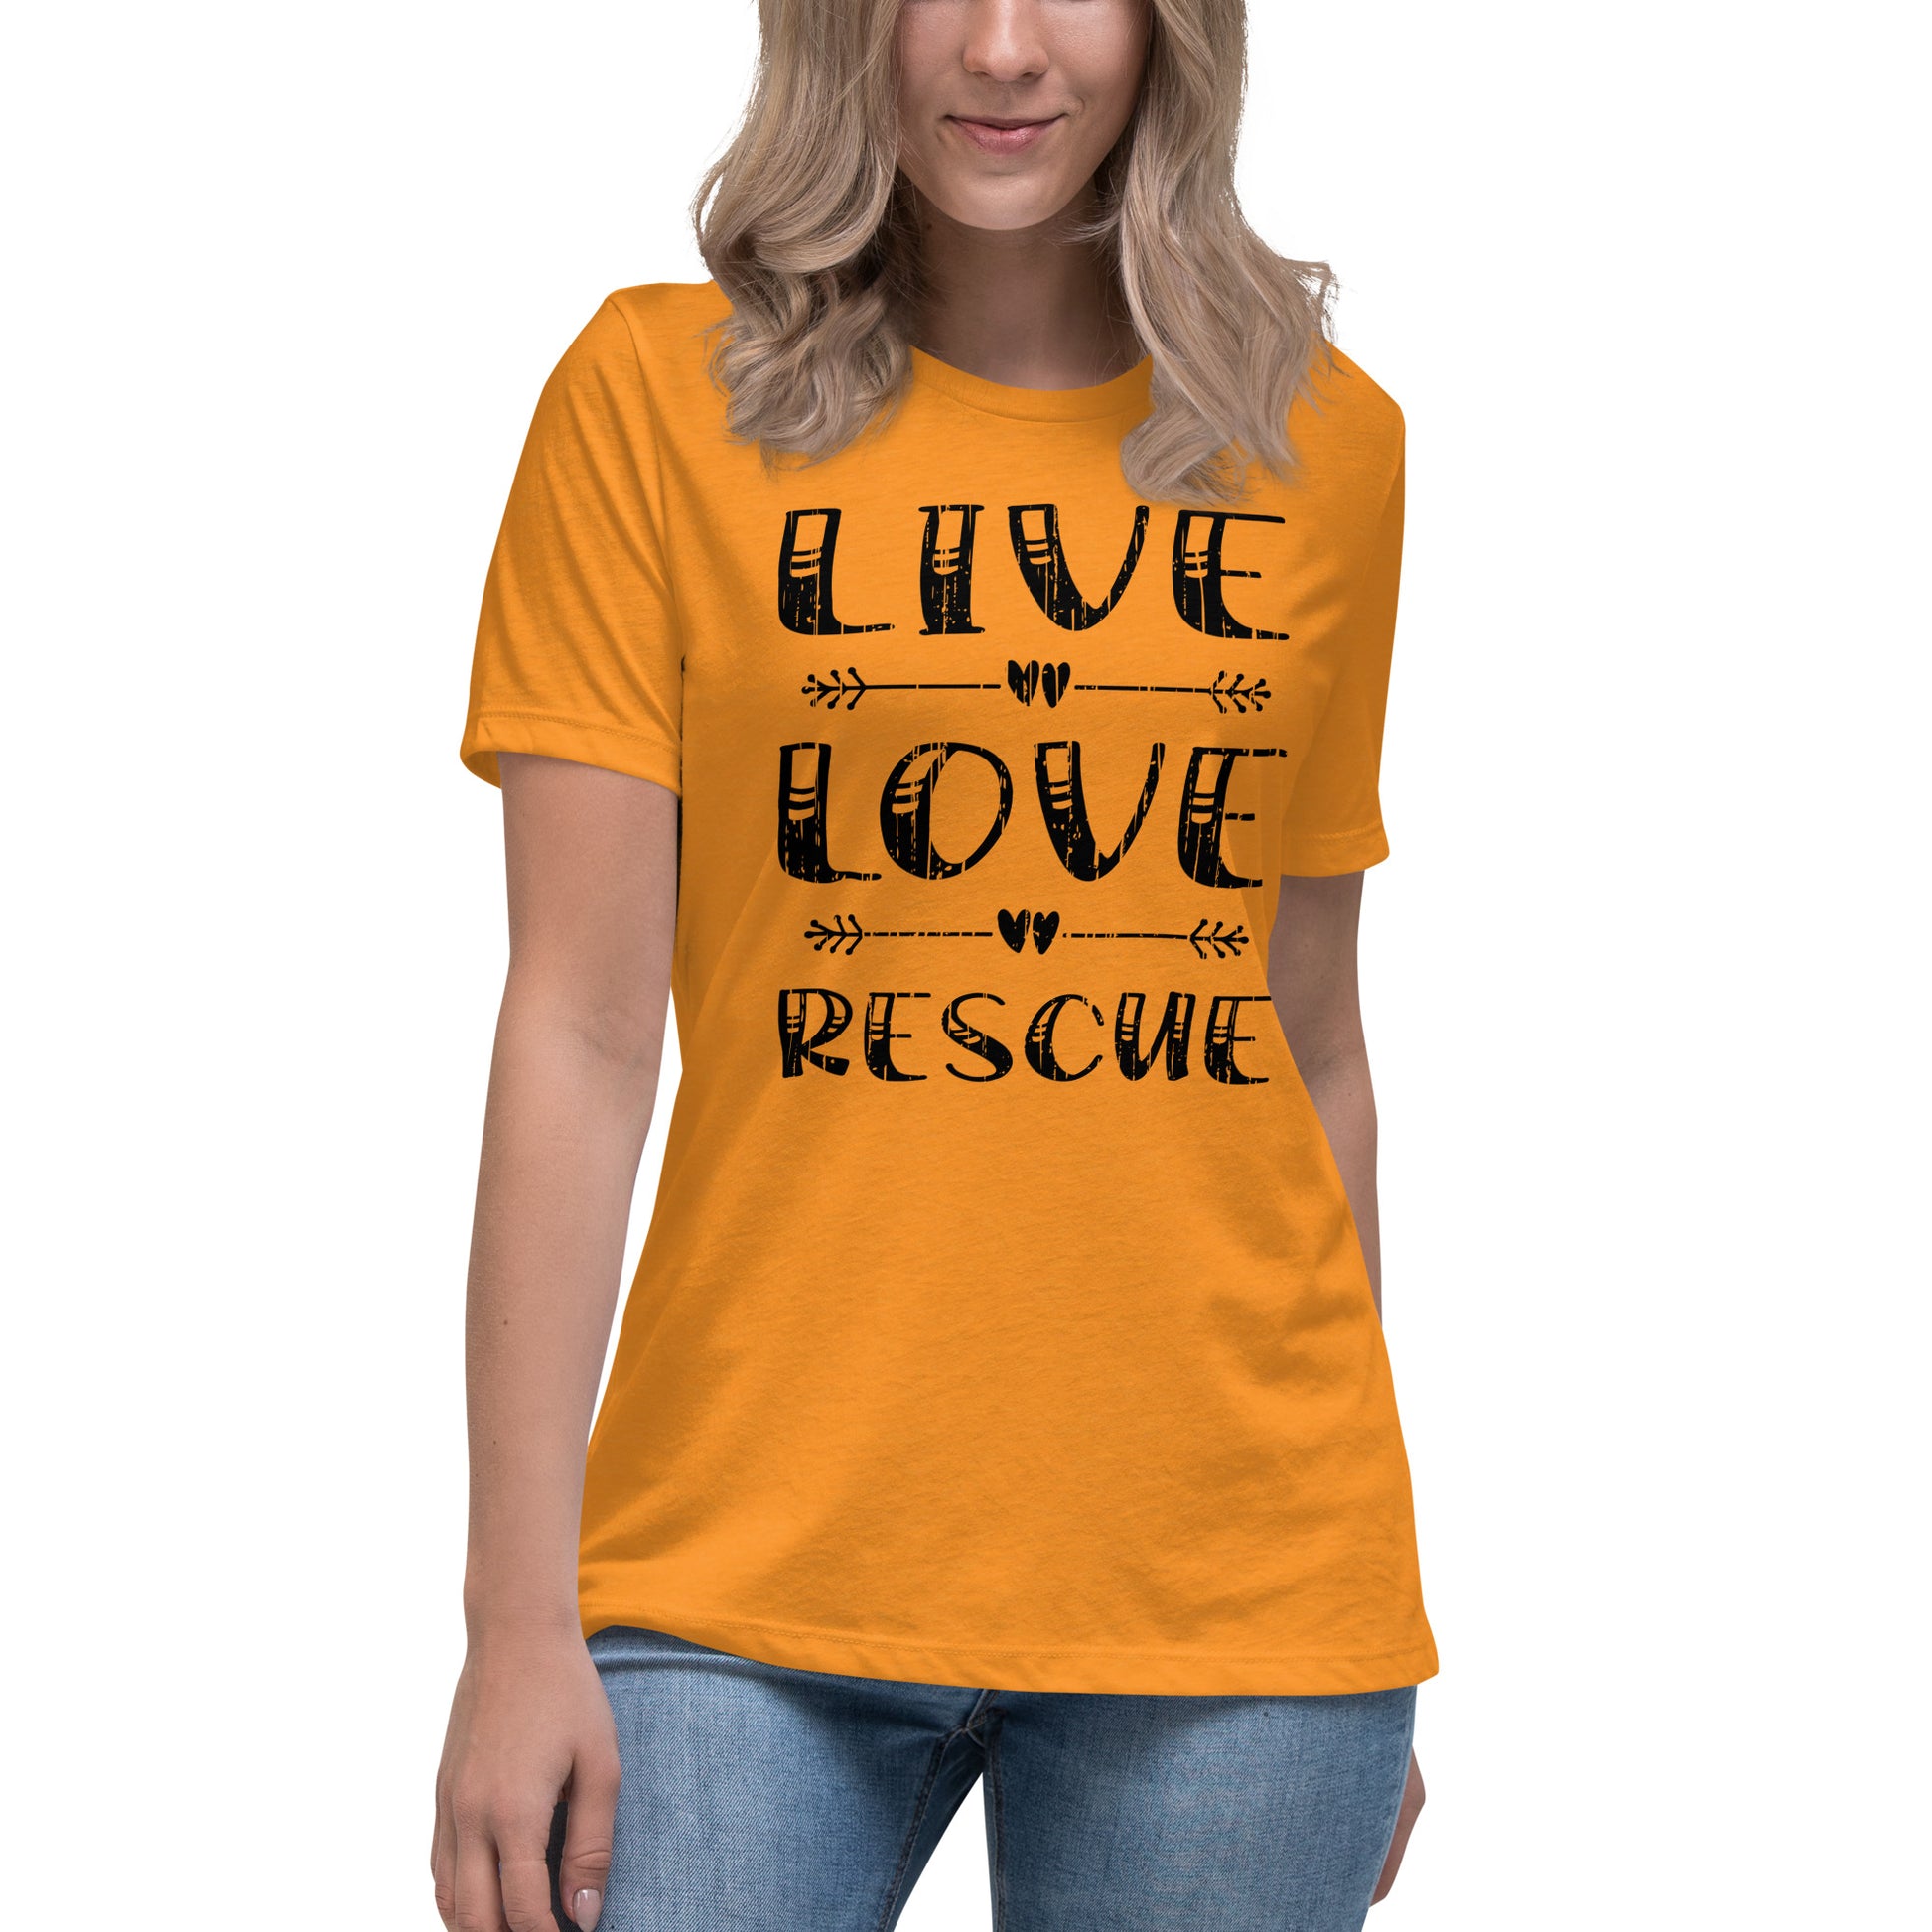 Live love rescue women’s relaxed fit t-shirts by Dog Artistry heather marmalade color